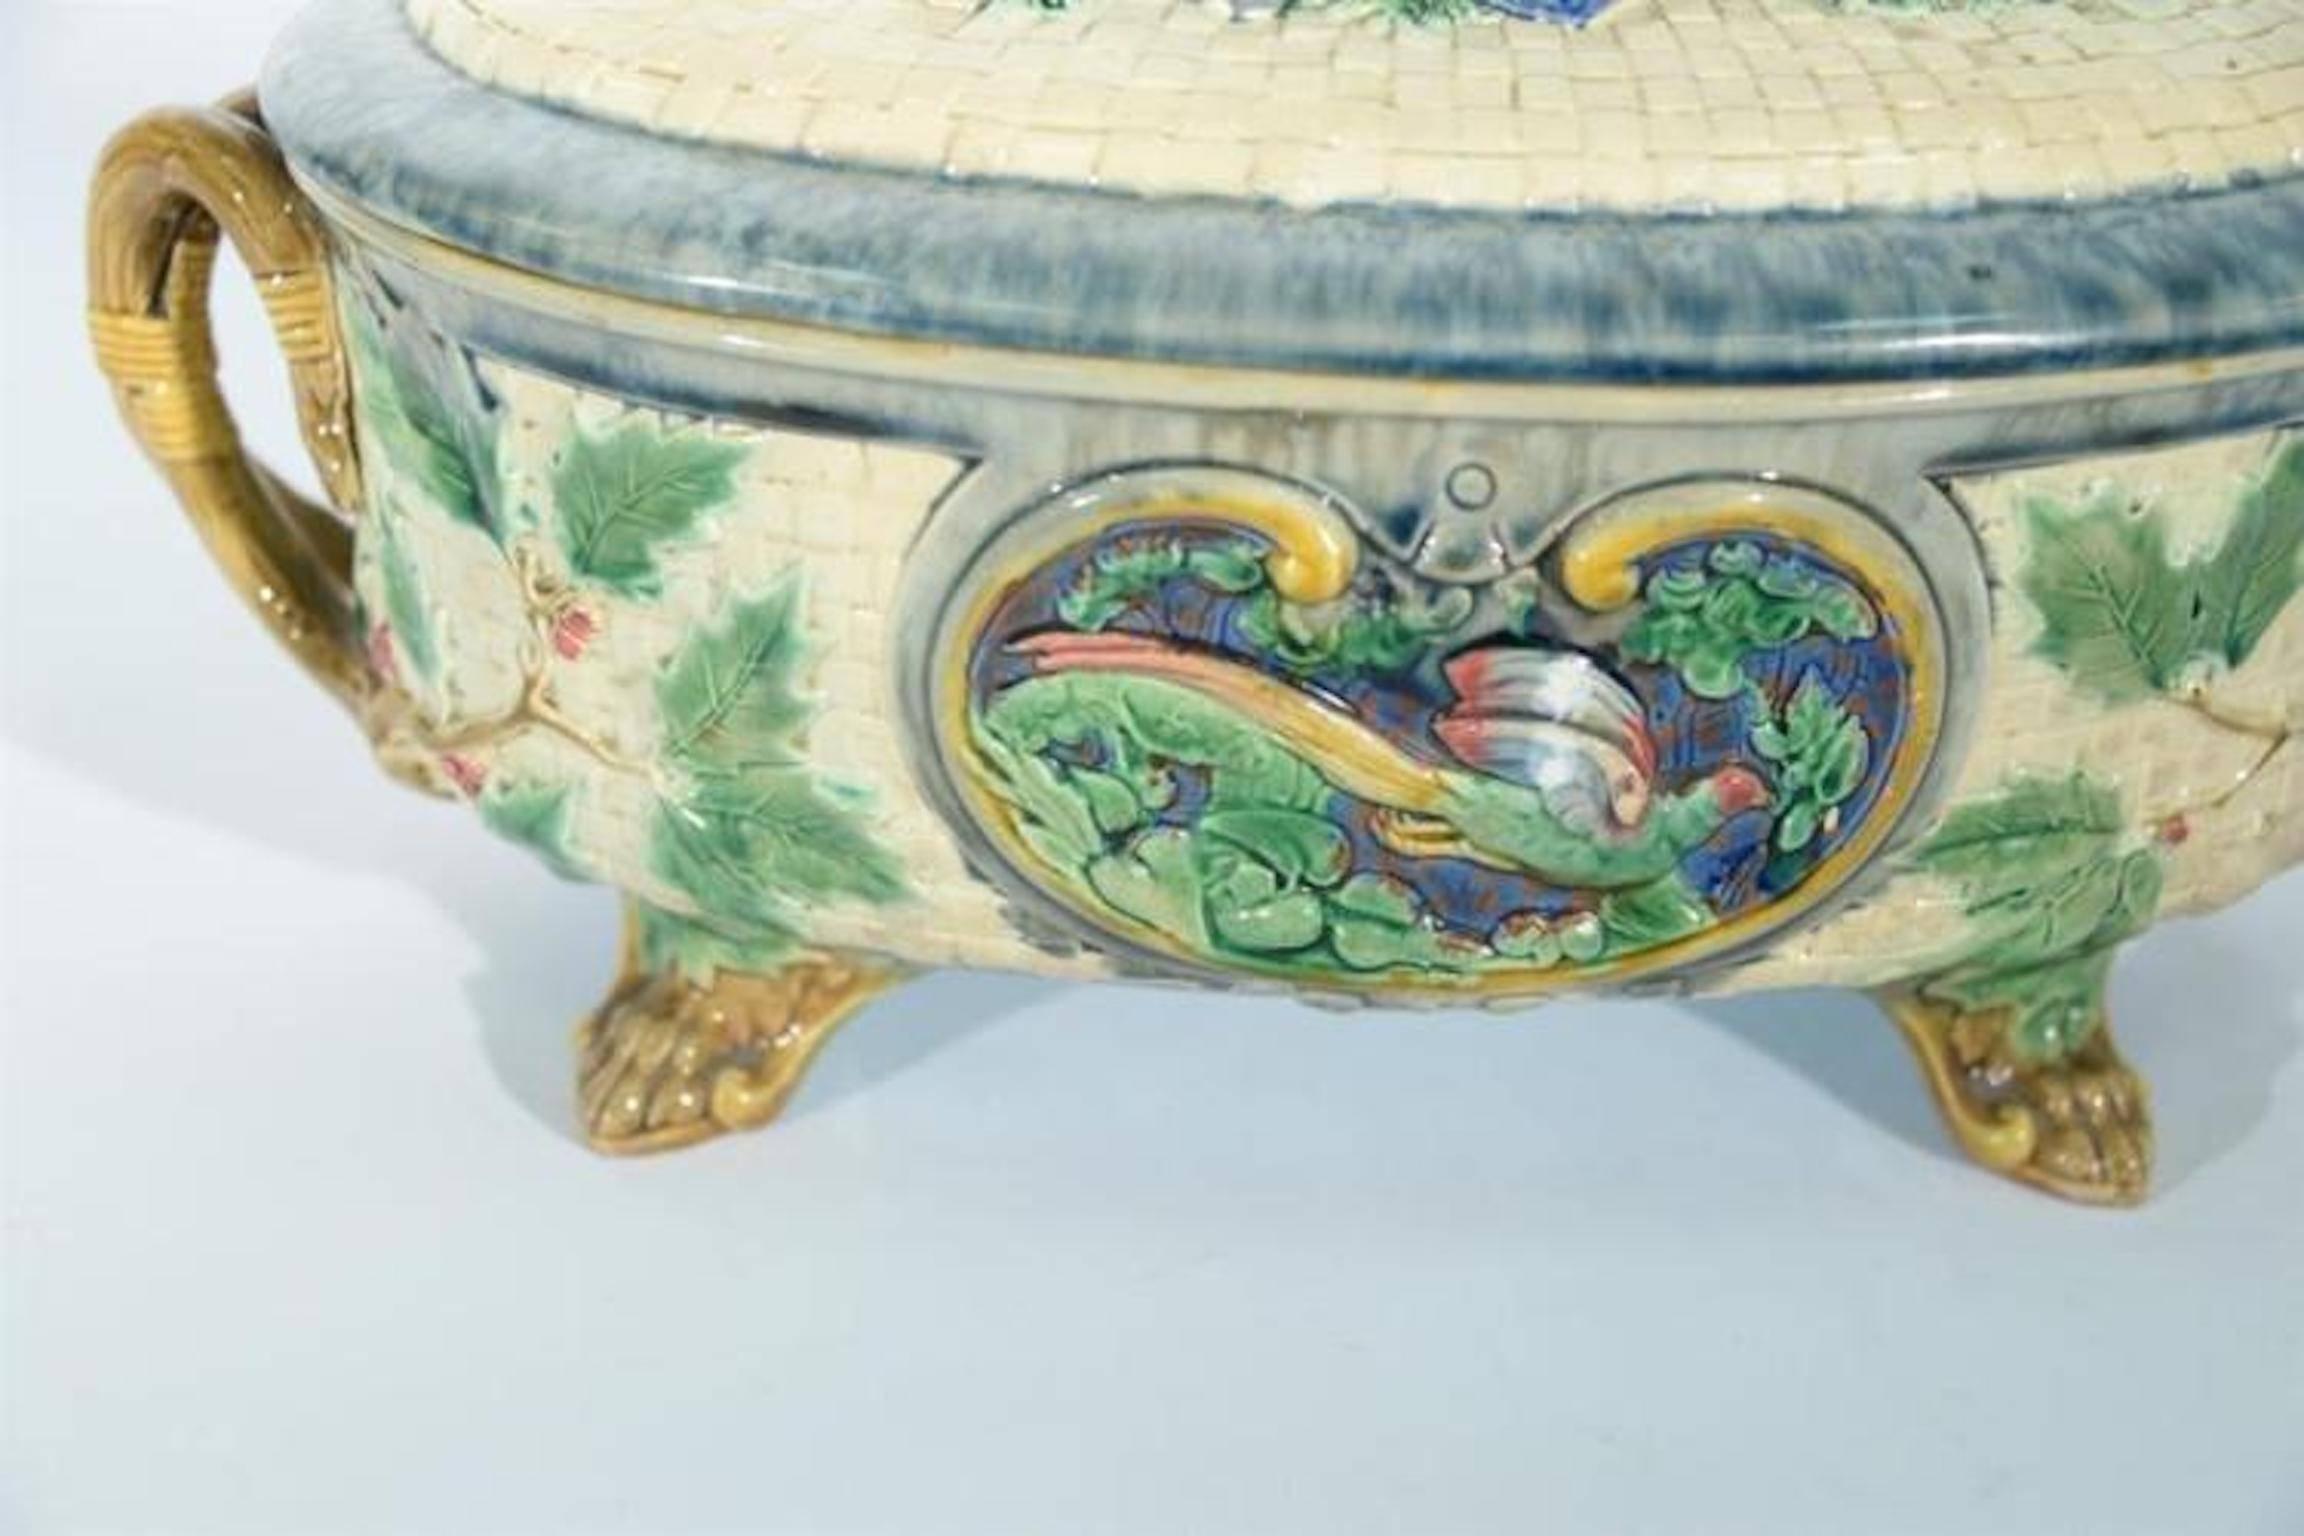 Minton Majolica covered tureen having basket weave body and cover. With hunting dog finial, rabbit and pheasant panel on each side, circa 1875. Sothebys sold $8750 March 11 1997